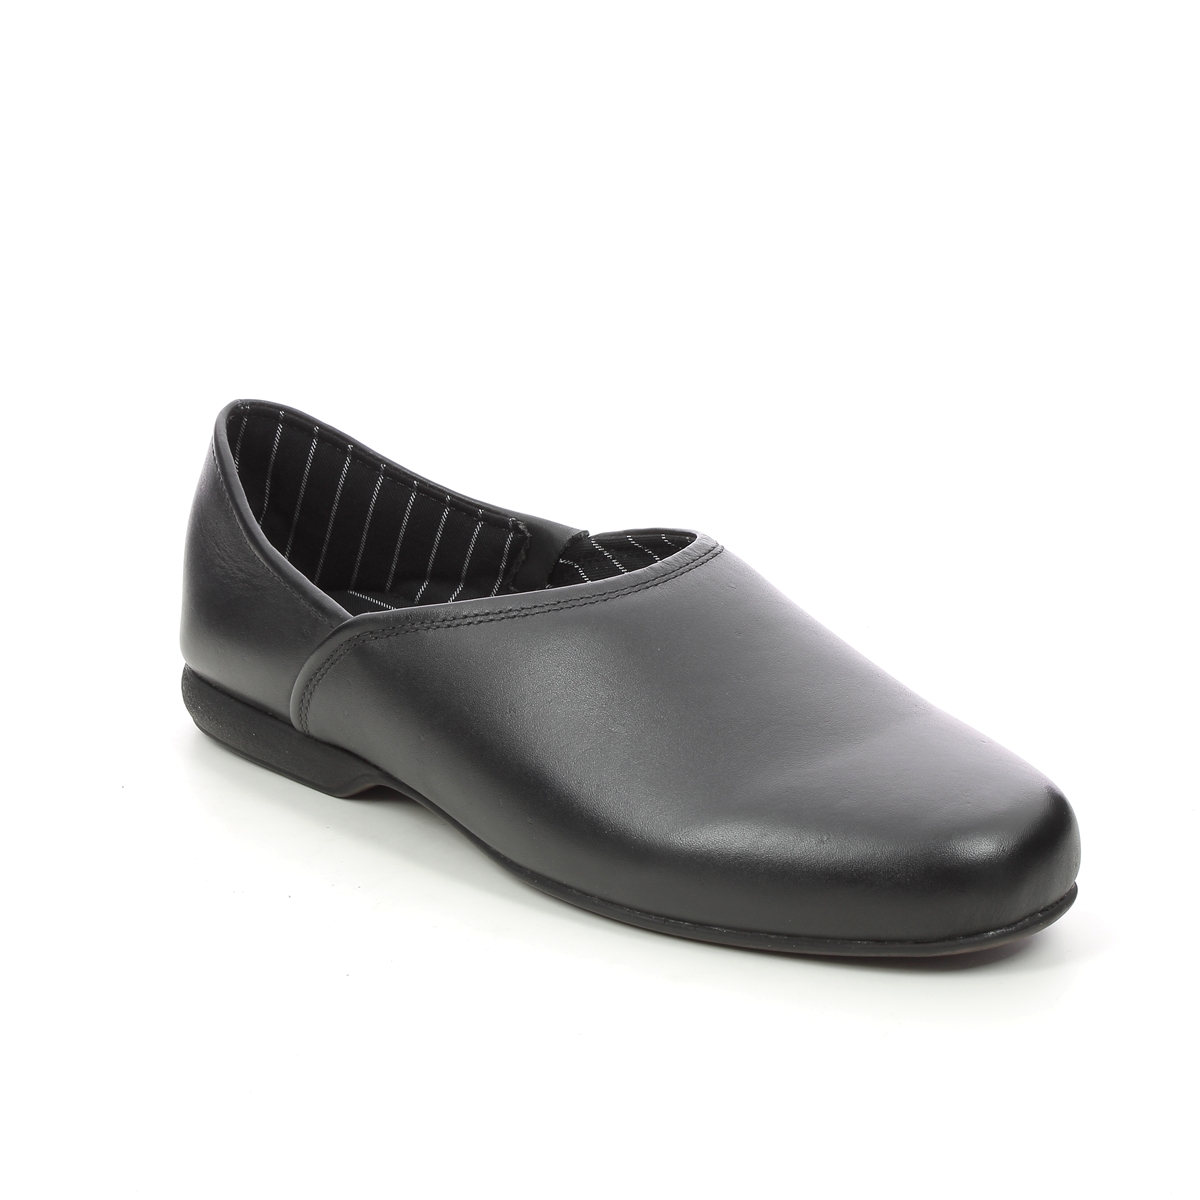 Clarks Harston Elite Black Leather Mens Slippers 447207G In Size 12 In Plain Black Leather G Width Fitting